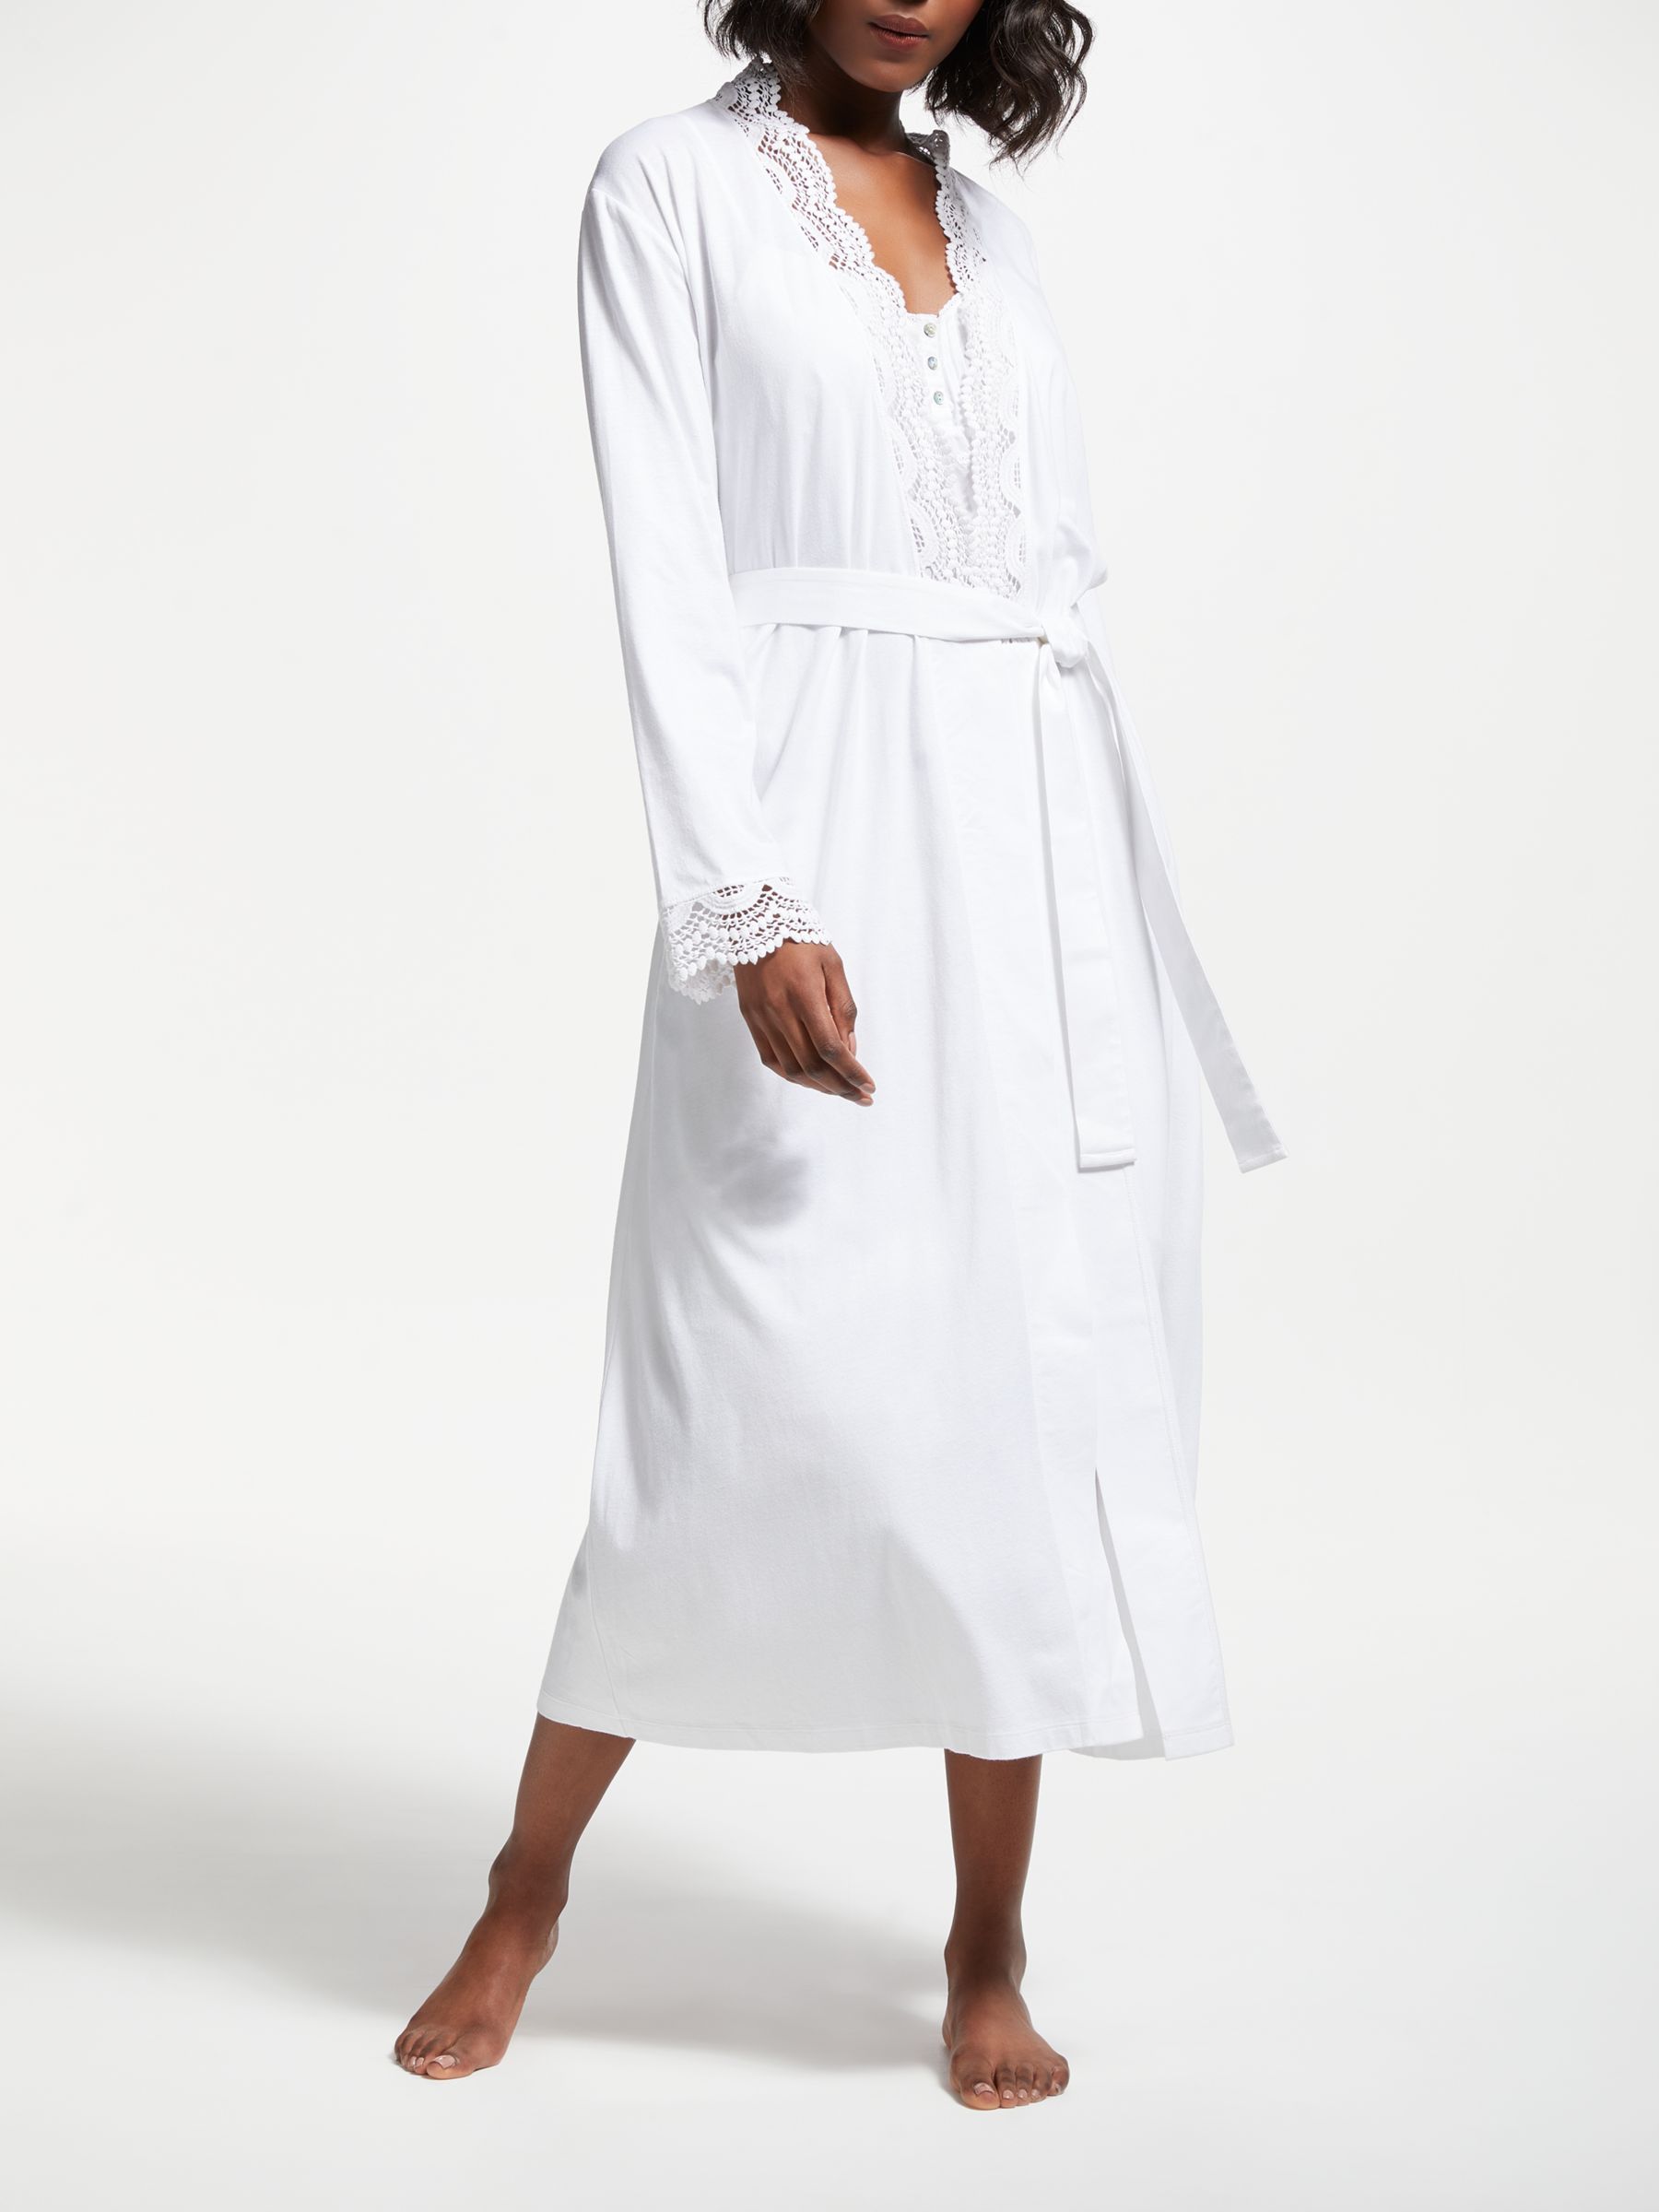 John Lewis & Partners Lace Trim Jersey Dressing Gown, White, S